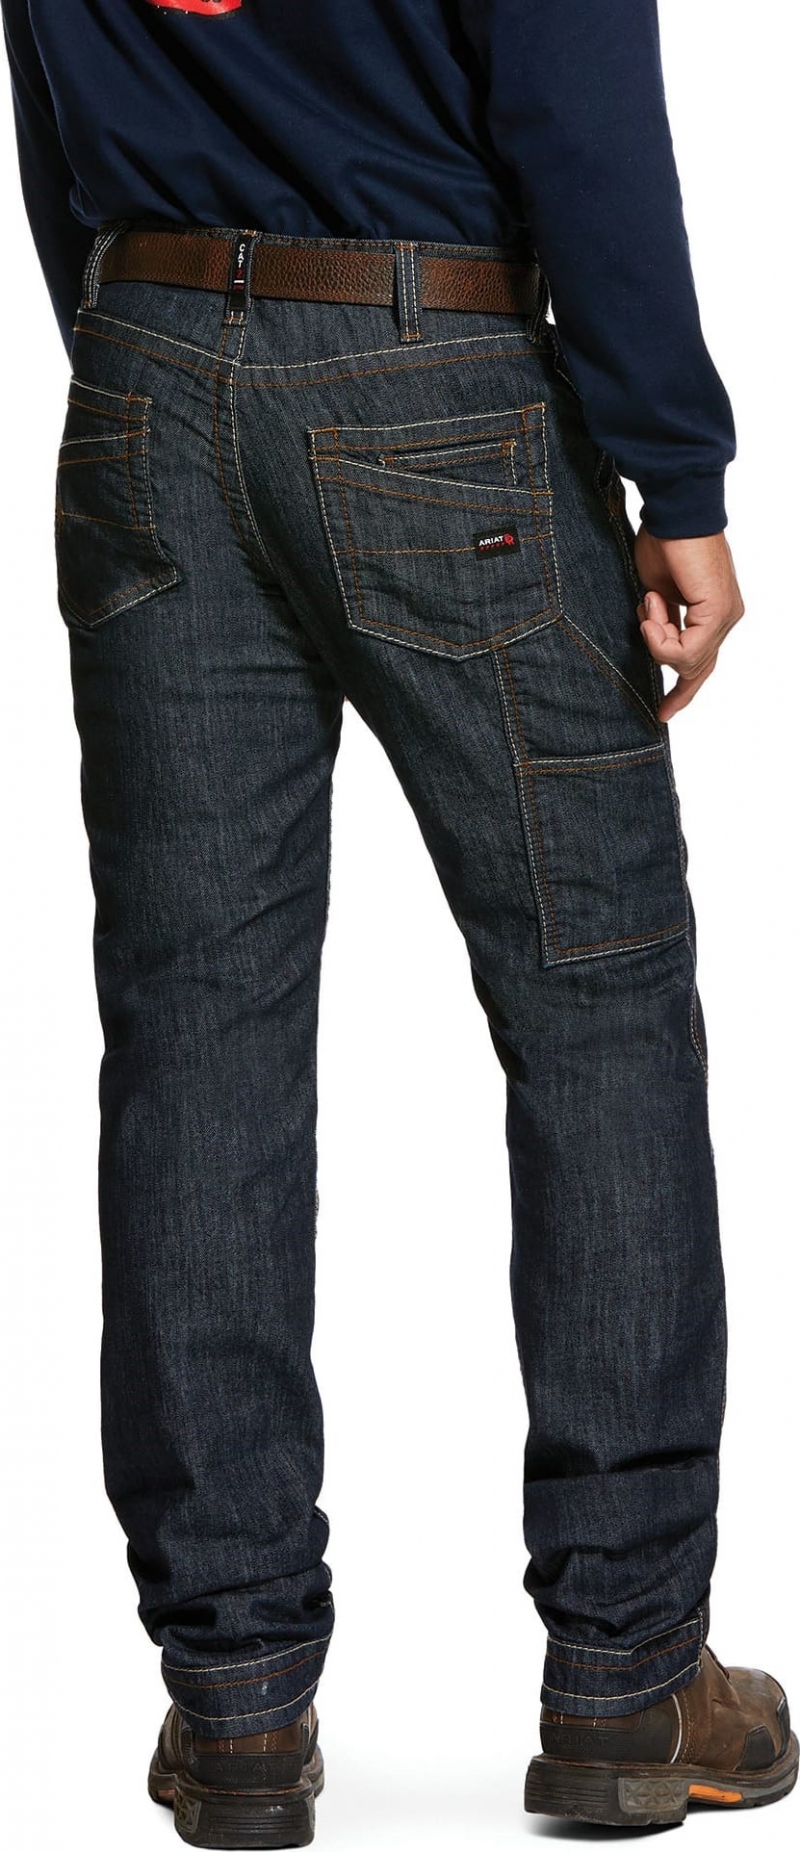 *SALE* LIMITED SIZES LEFT!! Ariat FR M4 Relaxed Fit Straight Leg Duralight Stretch Workhorse Jean - Rinse